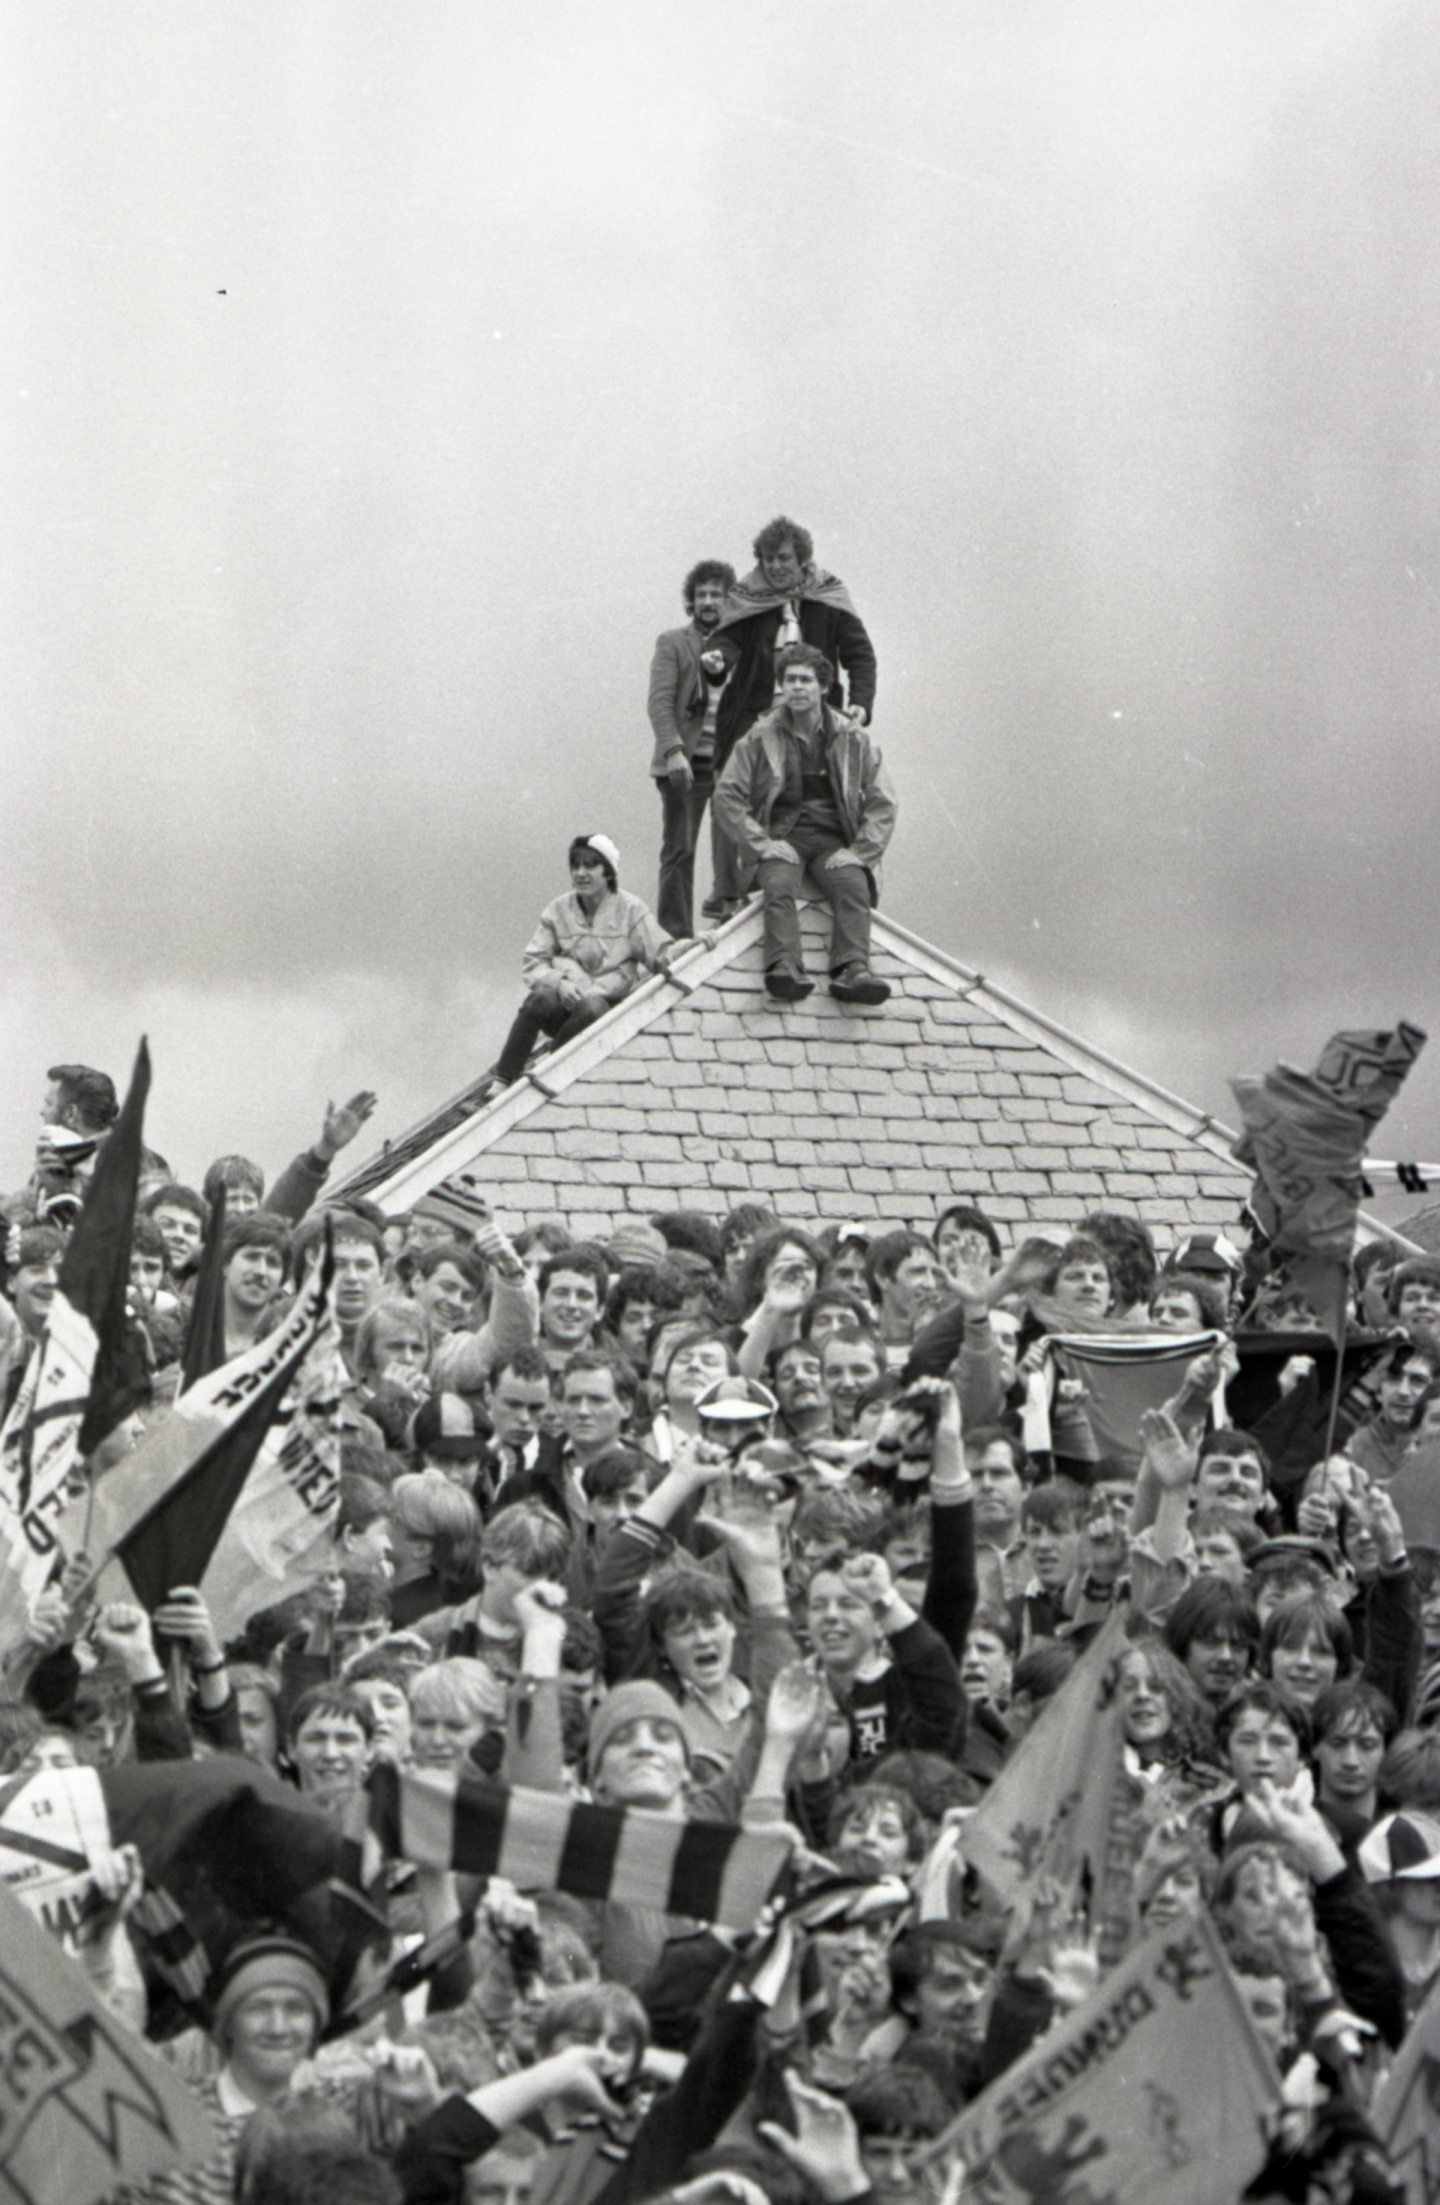 Supporters took to the roof to get the best view. Image: DC Thomson.